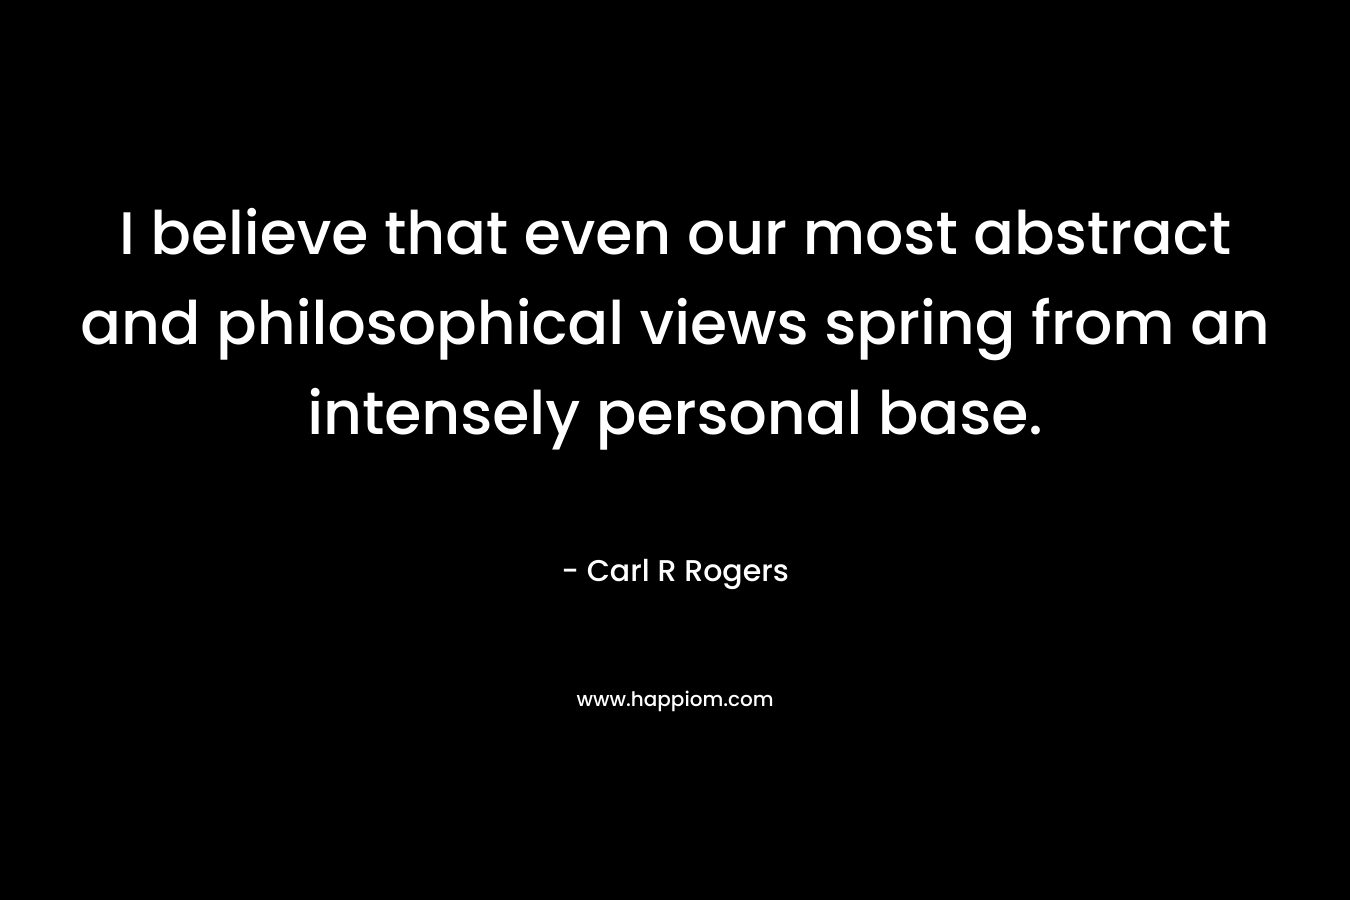 I believe that even our most abstract and philosophical views spring from an intensely personal base.